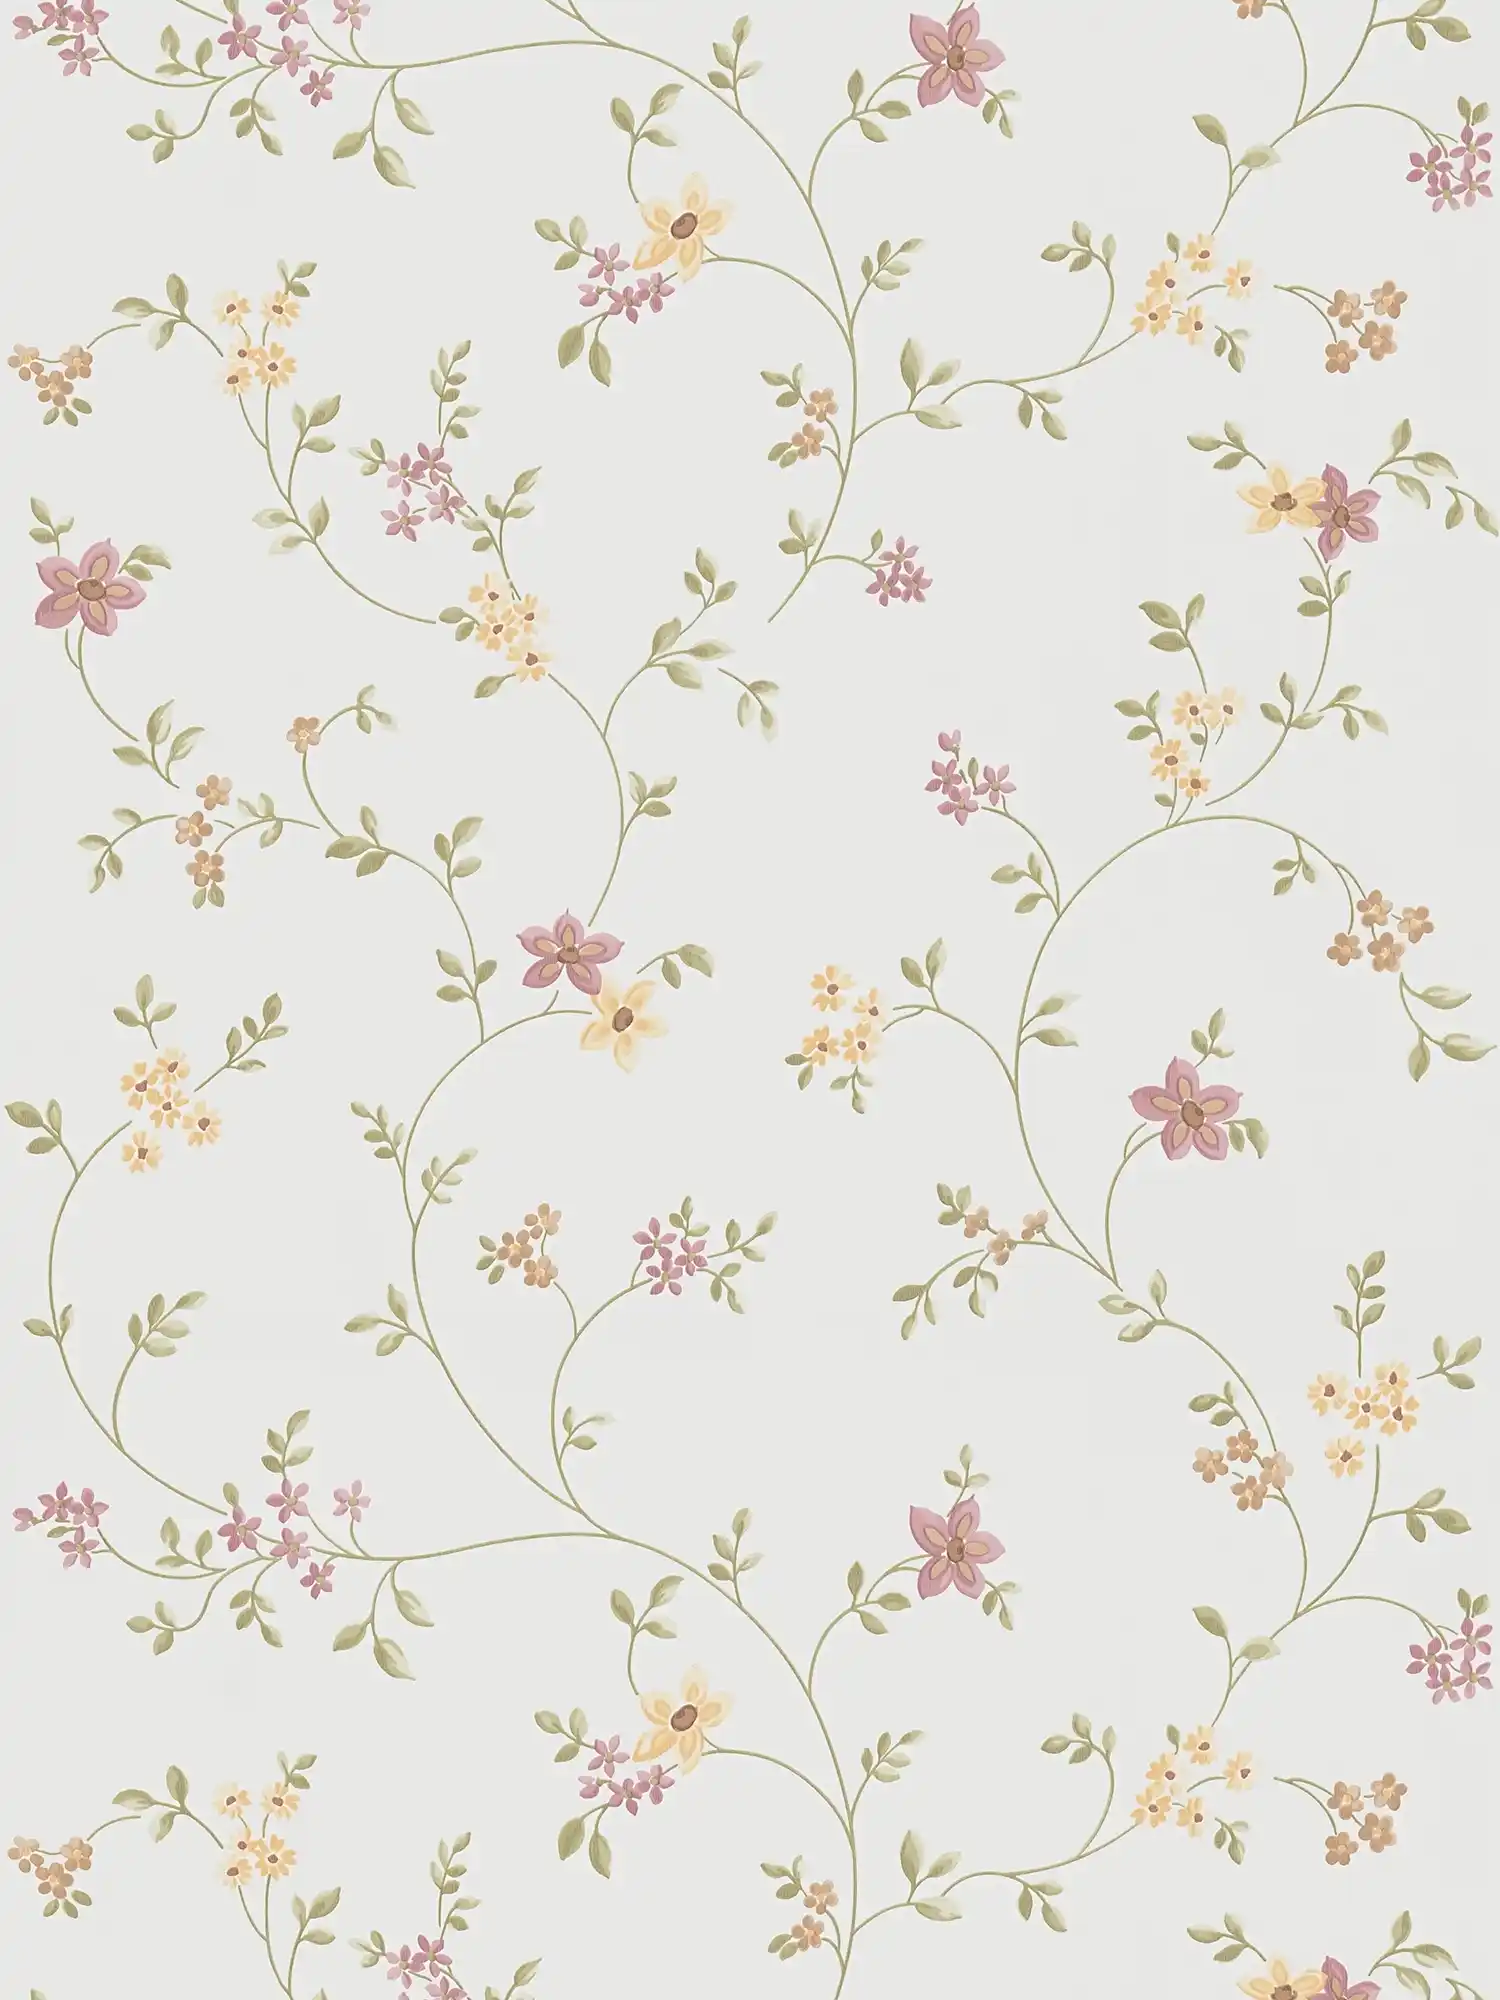 Self-adhesive wallpaper | floral pattern with subtle vines - cream, green, beige
